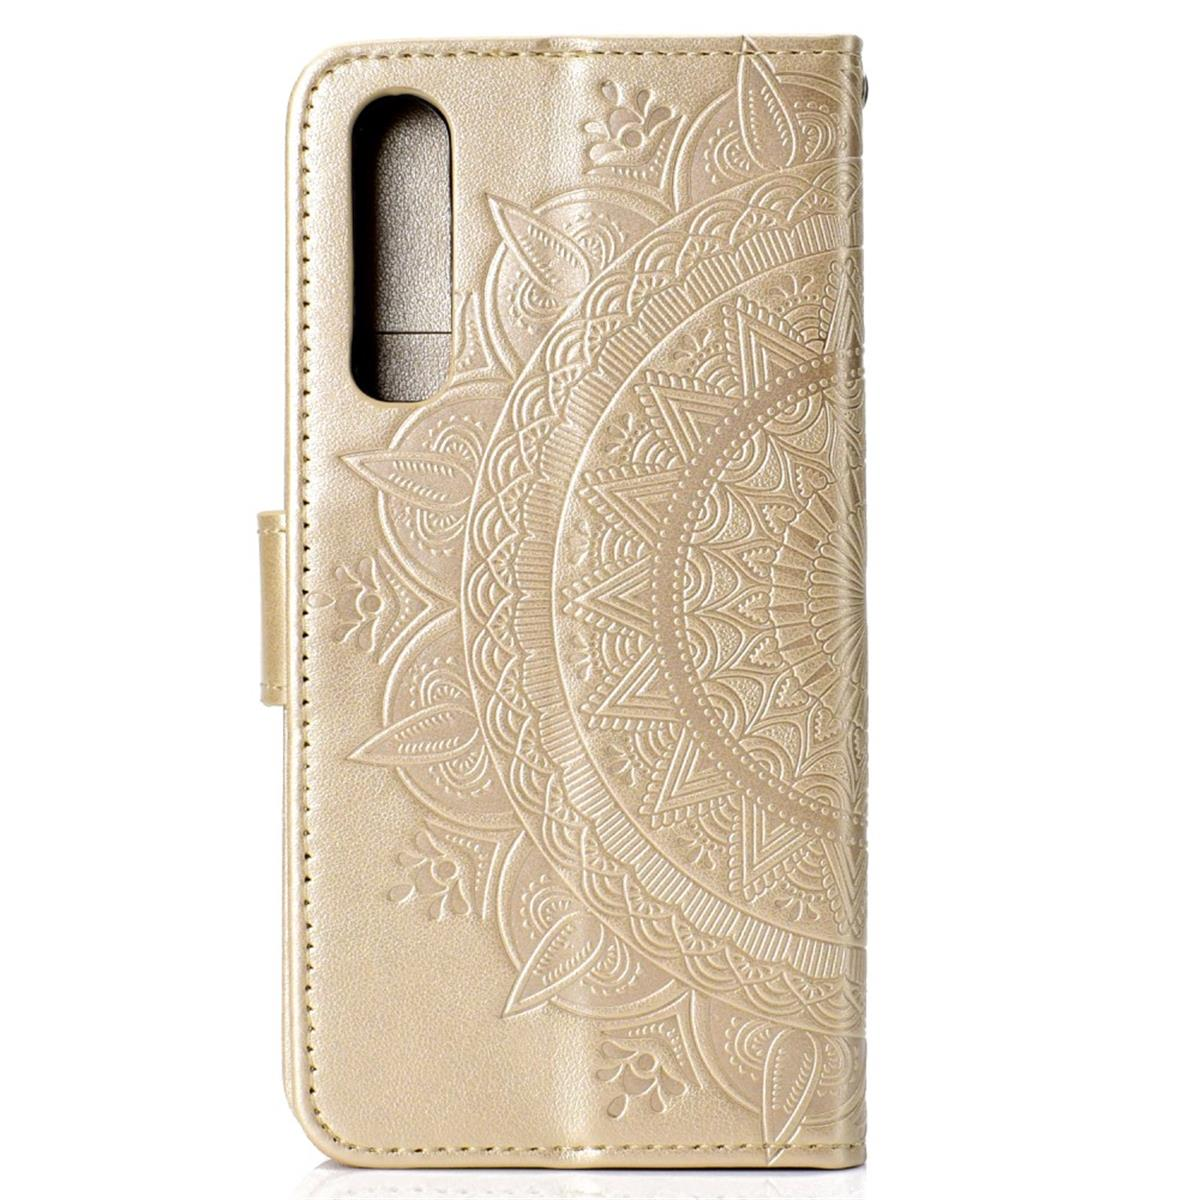 COVERKINGZ Klapphülle mit Huawei, Muster, Gold P30, Mandala Bookcover